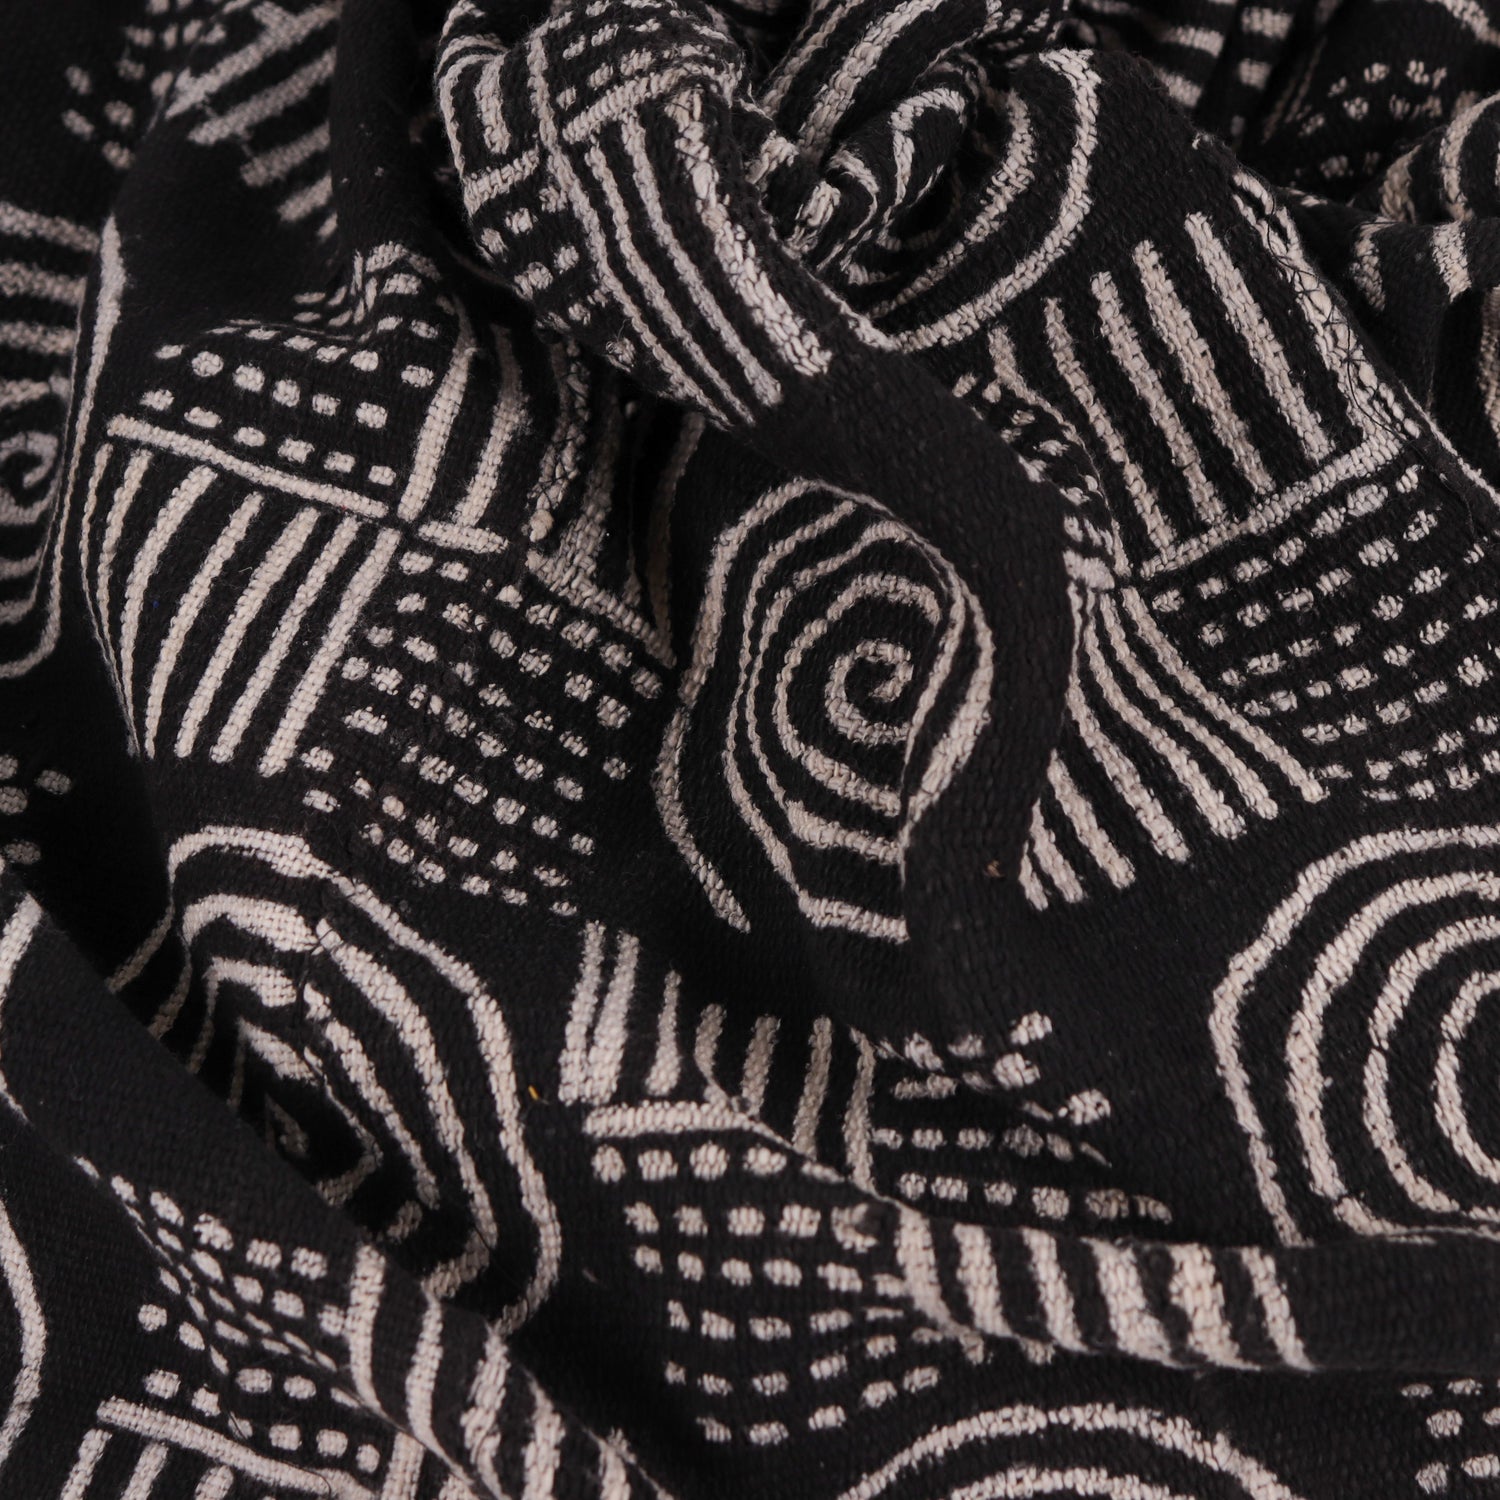 MC256 - Black and White Handmade Mudcloth fabric from Mali West Africa |  African fabric